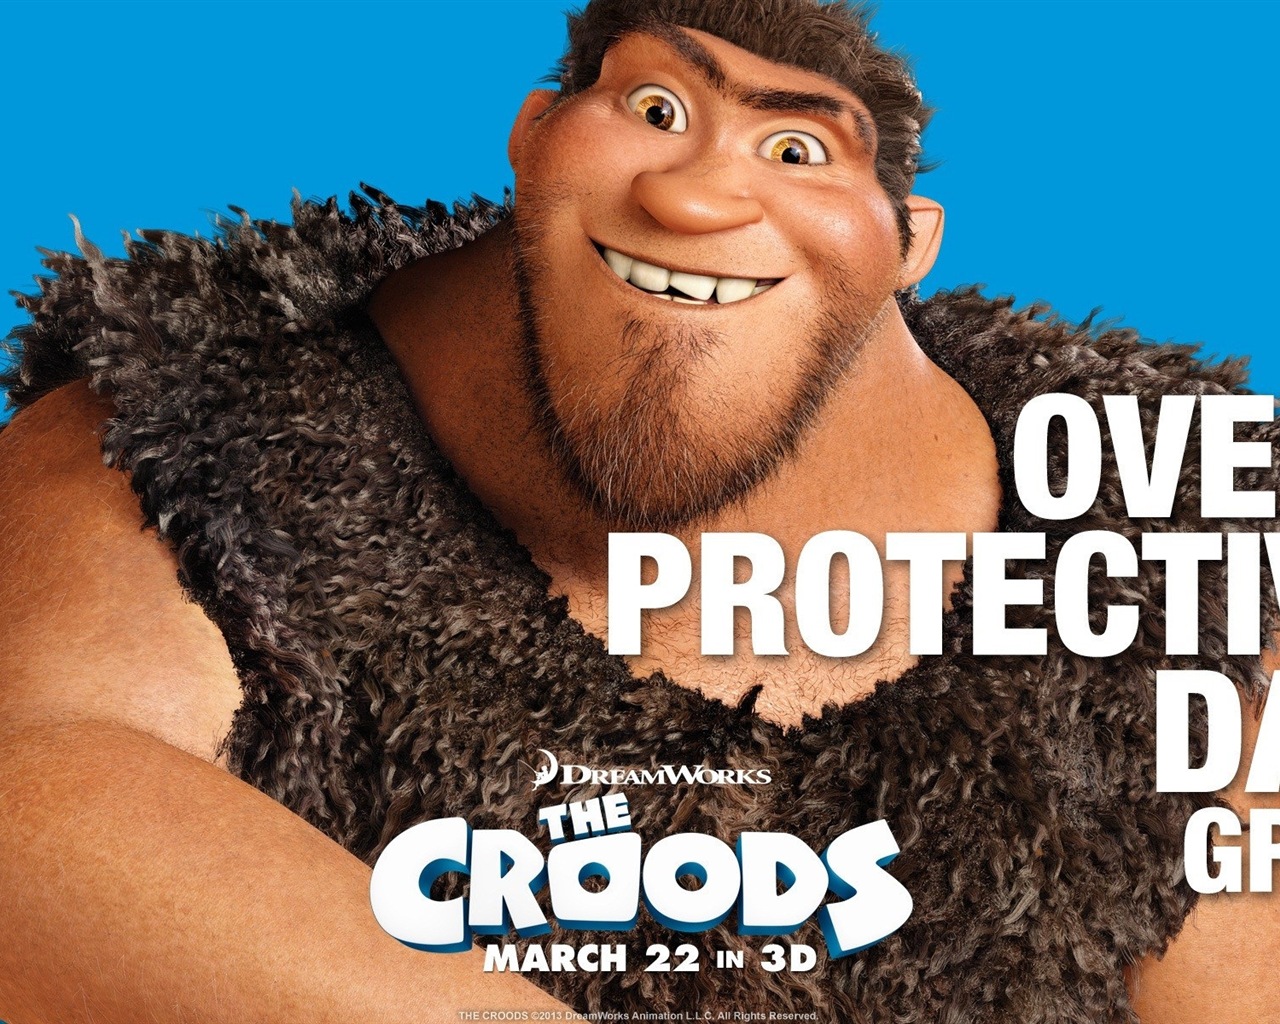 V Croods HD Movie Wallpapers #11 - 1280x1024